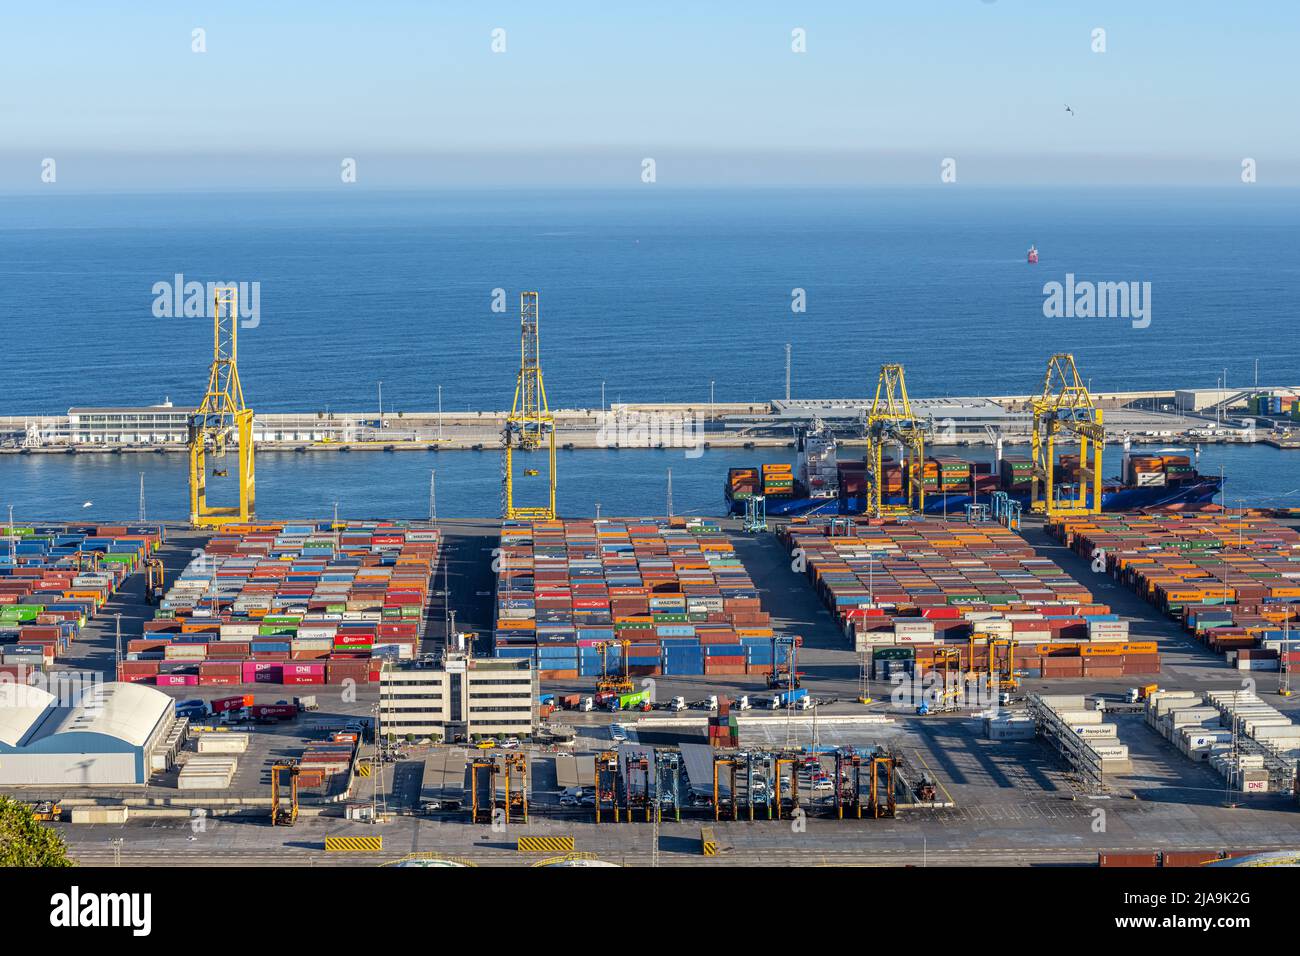 BARCELONA, SPAIN - February 02, 2022: The commercial harbour of Barcelona with containers and cranes Stock Photo